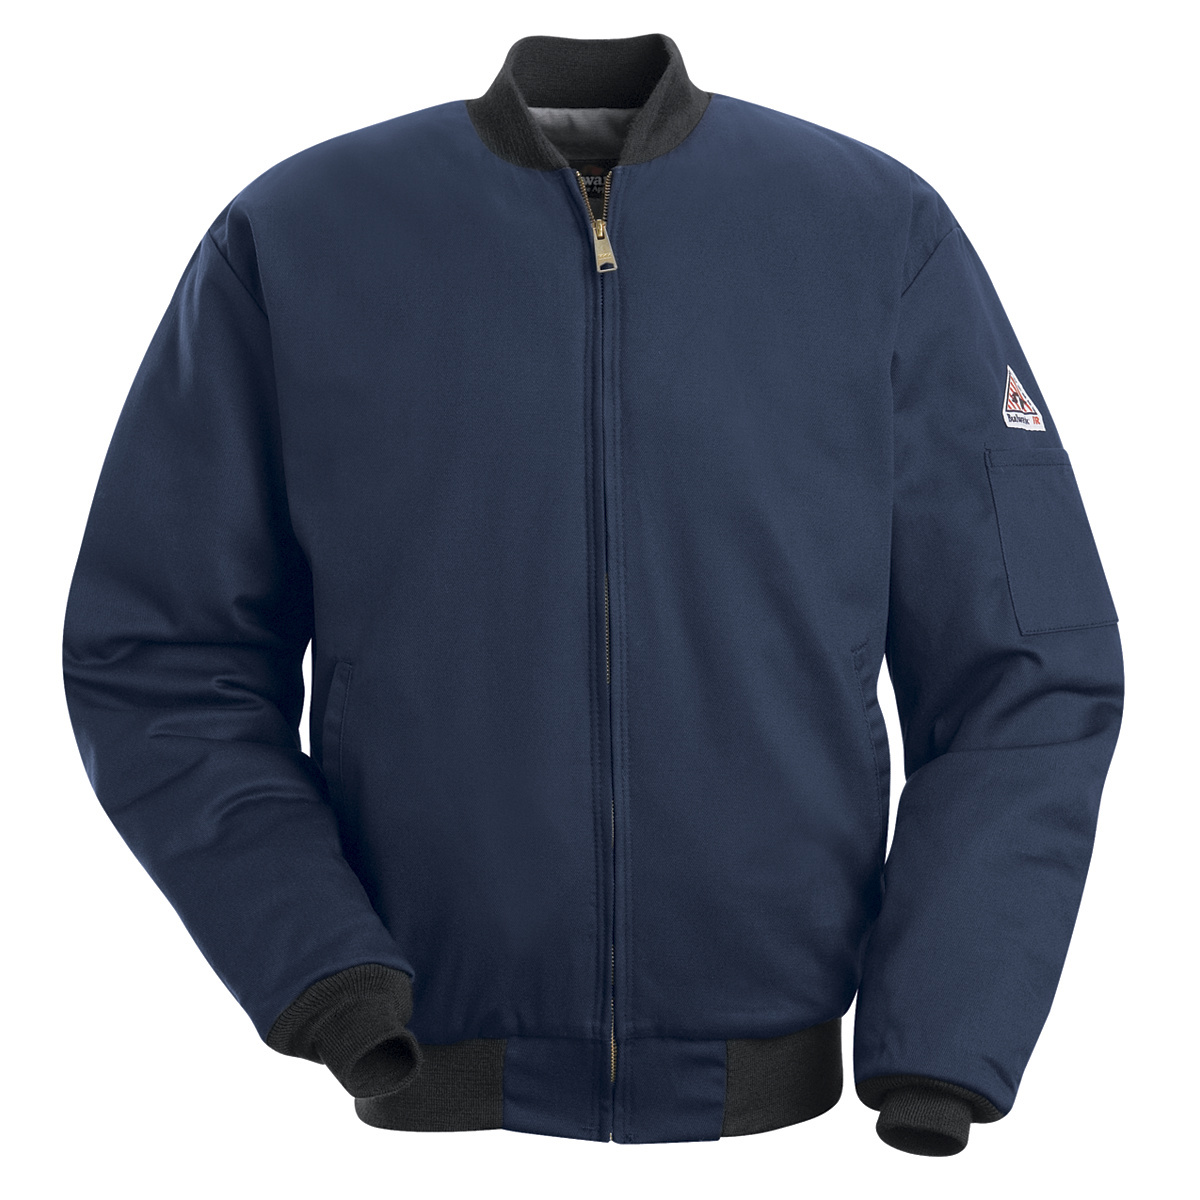 Bulwark® Large Regular Navy Blue EXCEL FR® Twill Cotton Water Repellent Flame Resistant Jacket With Cotton Lining And Zipper Fro